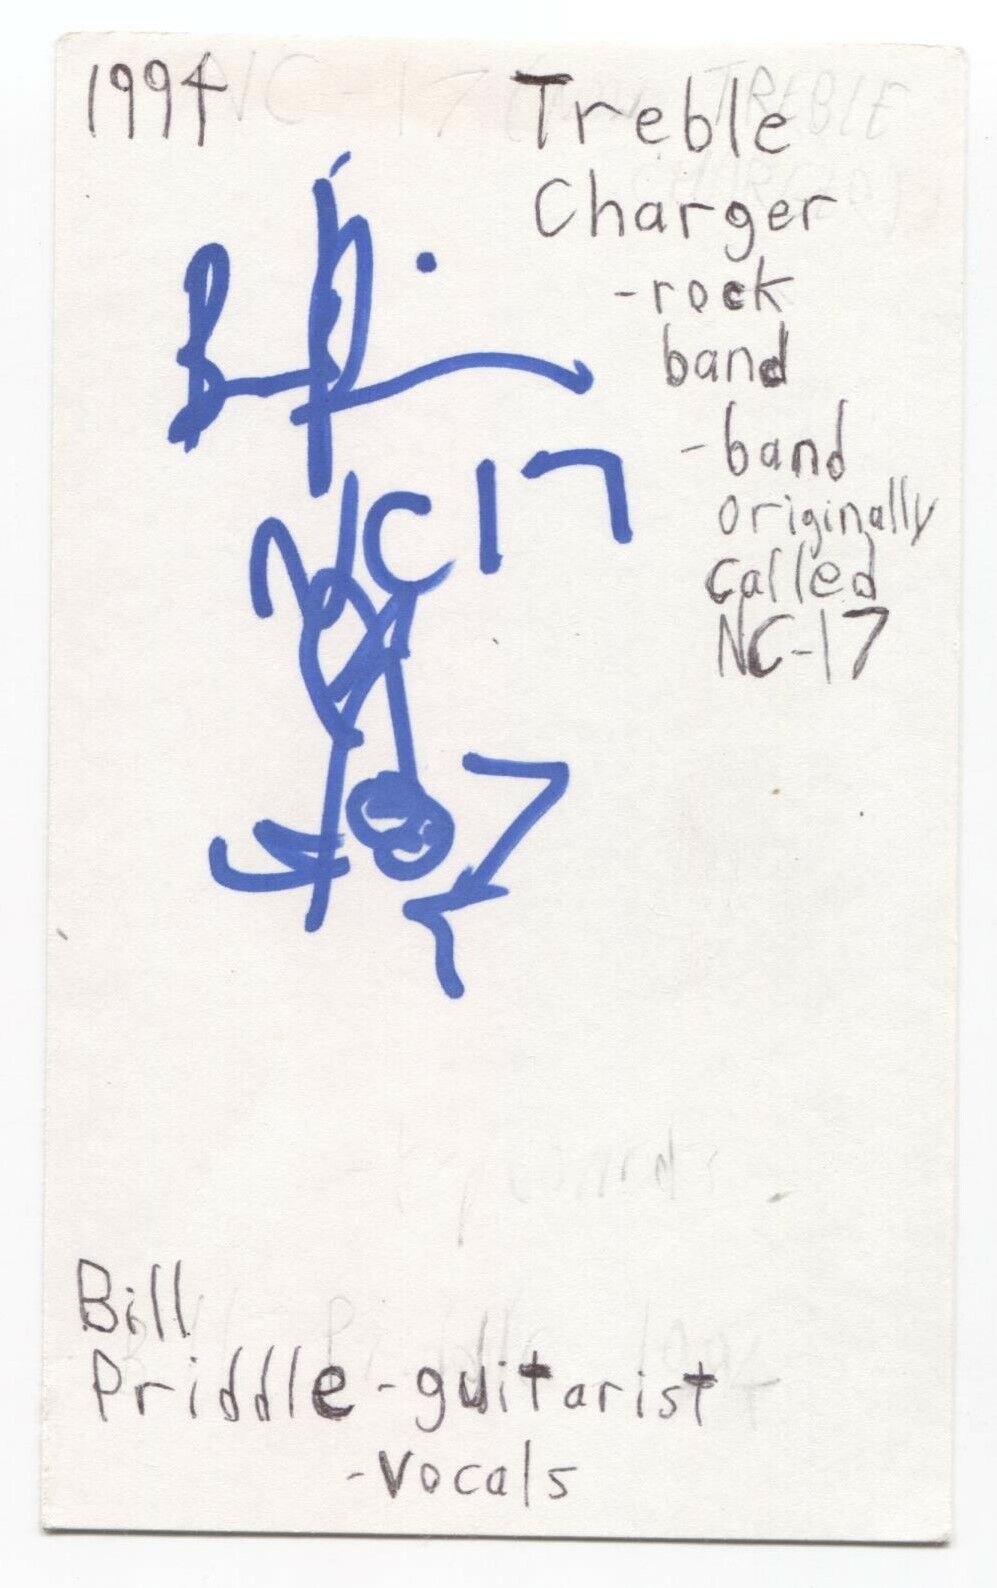 Treble Charger - Bill Priddle Signed 3x5 Index Card Autographed Signature Band